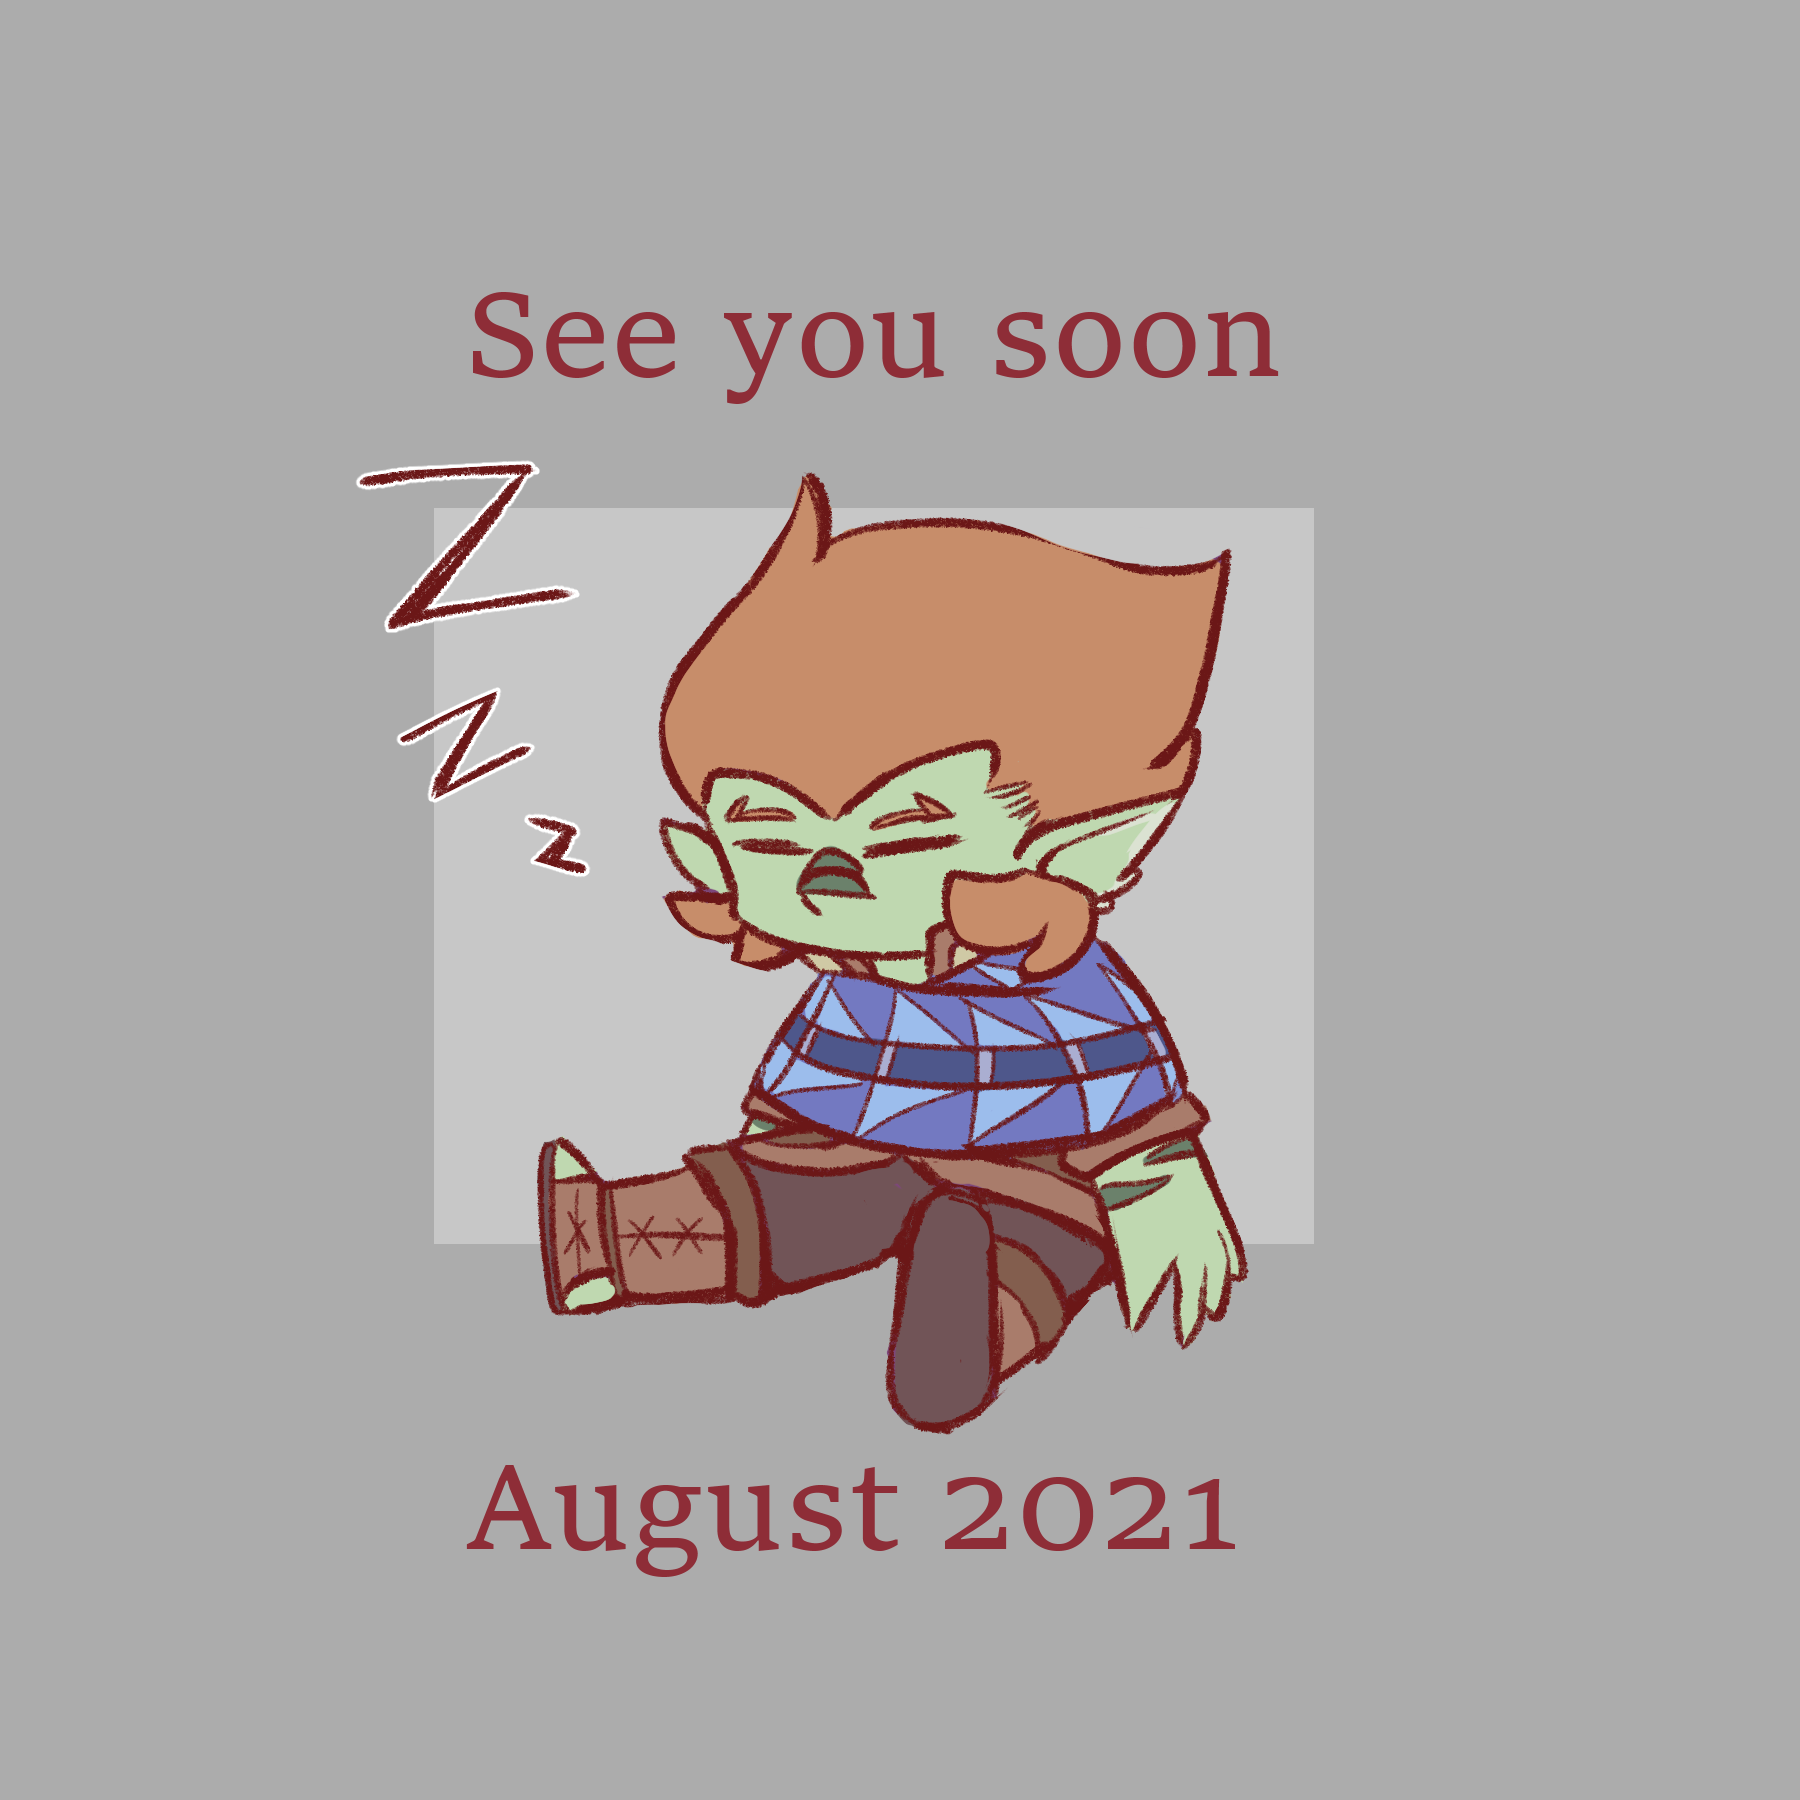 See You Soon (August 2021)